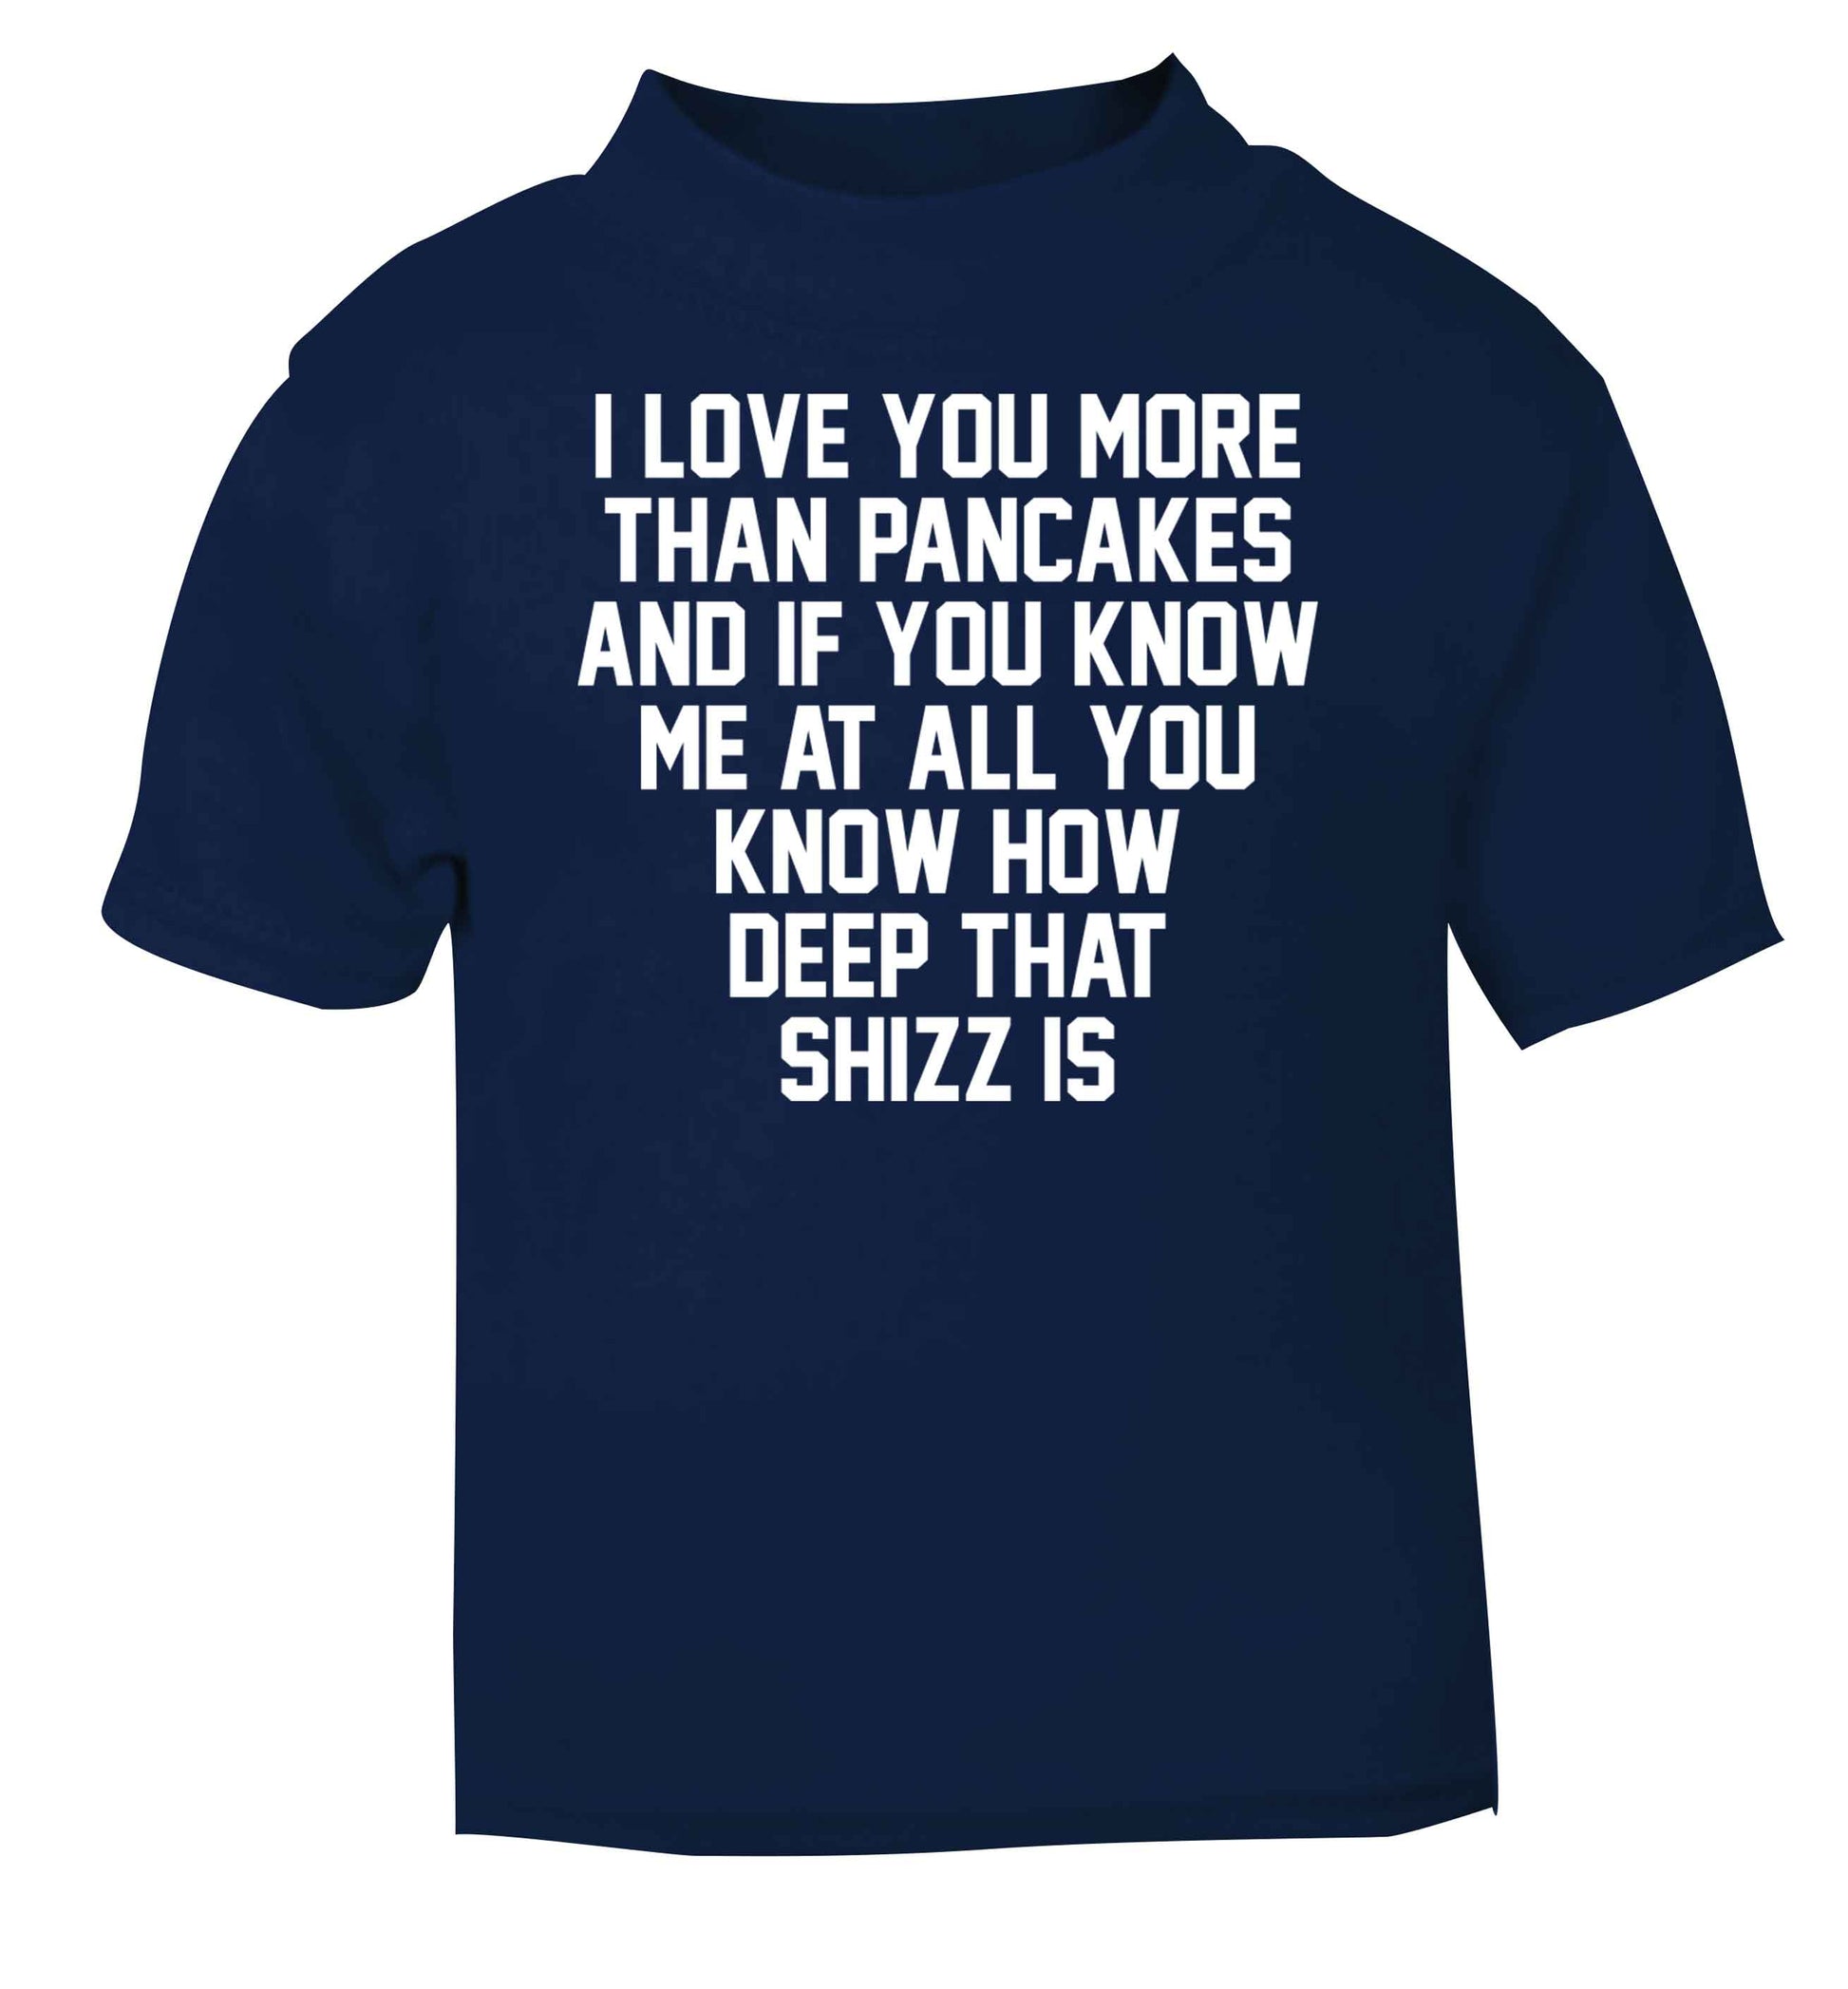 I love you more than pancakes and if you know me at all you know how deep that shizz is navy baby toddler Tshirt 2 Years